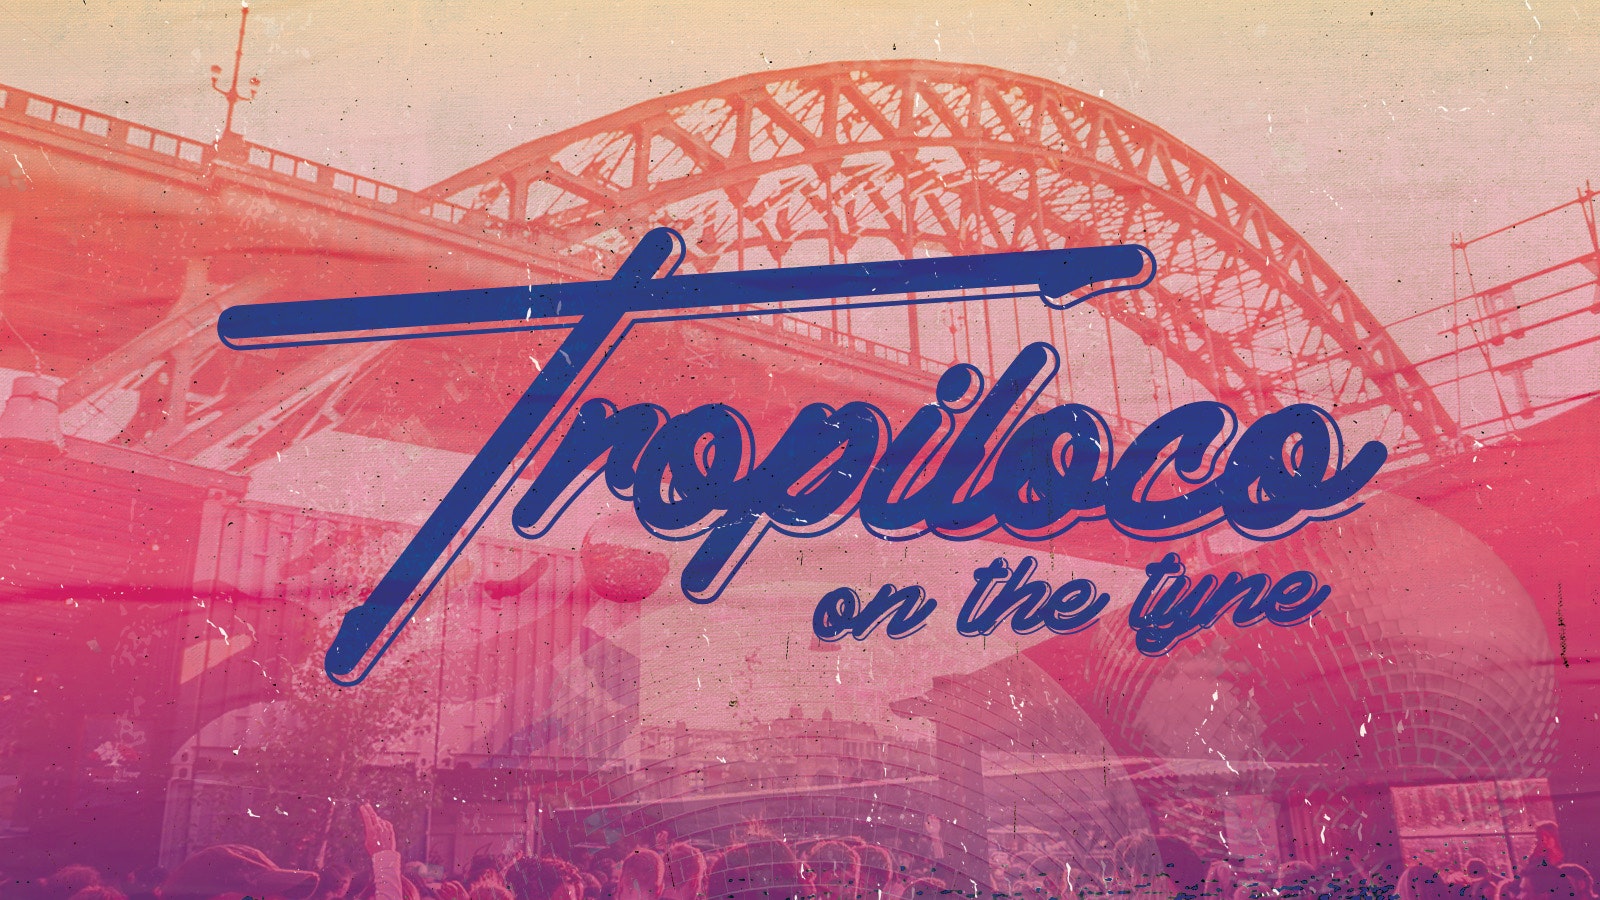 TROPILOCO ON THE TYNE ☀️🌊 FINAL 20 TICKETS! // HWKRLAND // 6-11pm – 22nd April